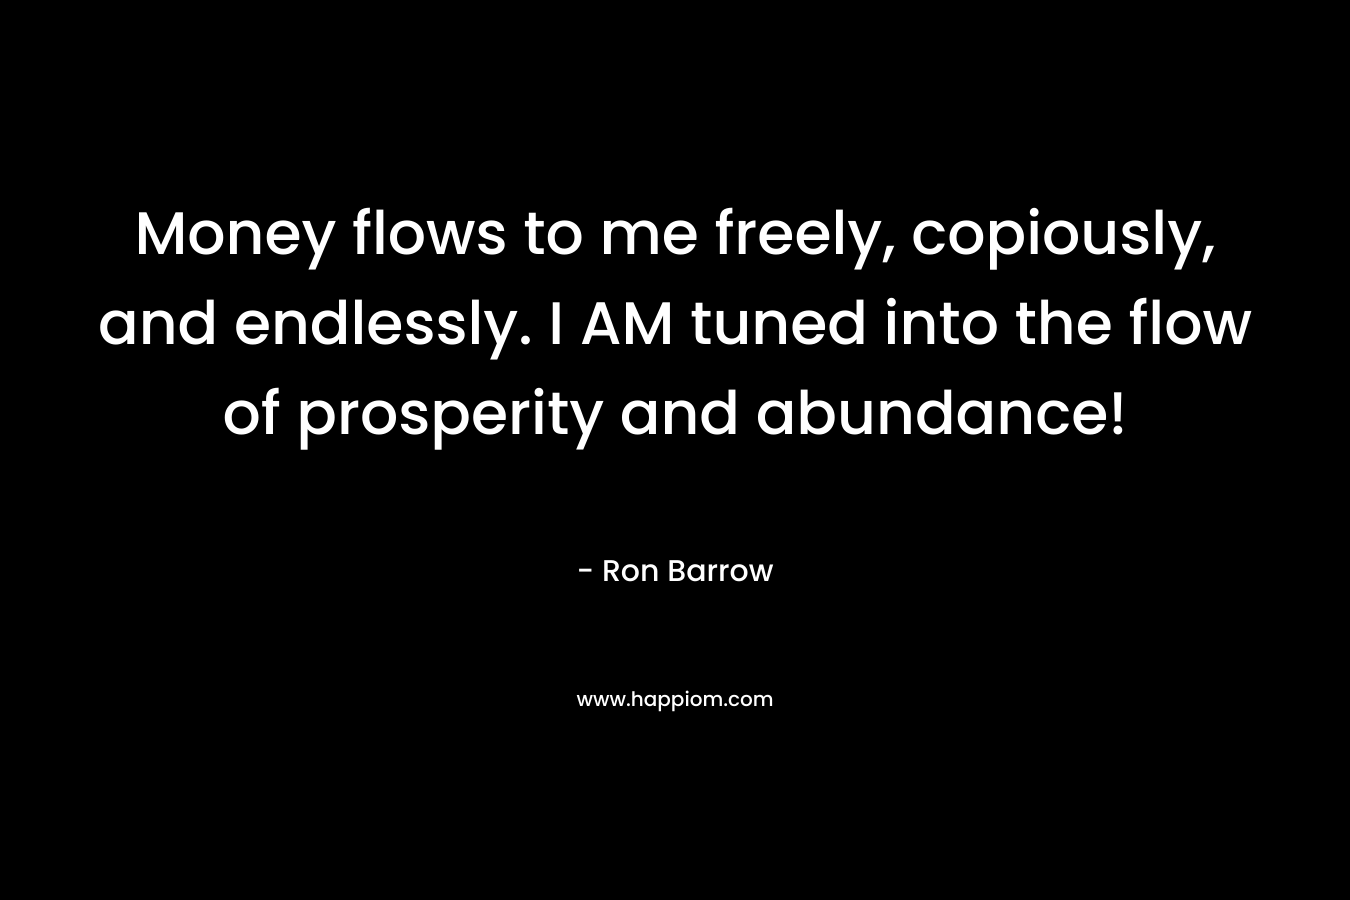 Money flows to me freely, copiously, and endlessly. I AM tuned into the flow of prosperity and abundance!